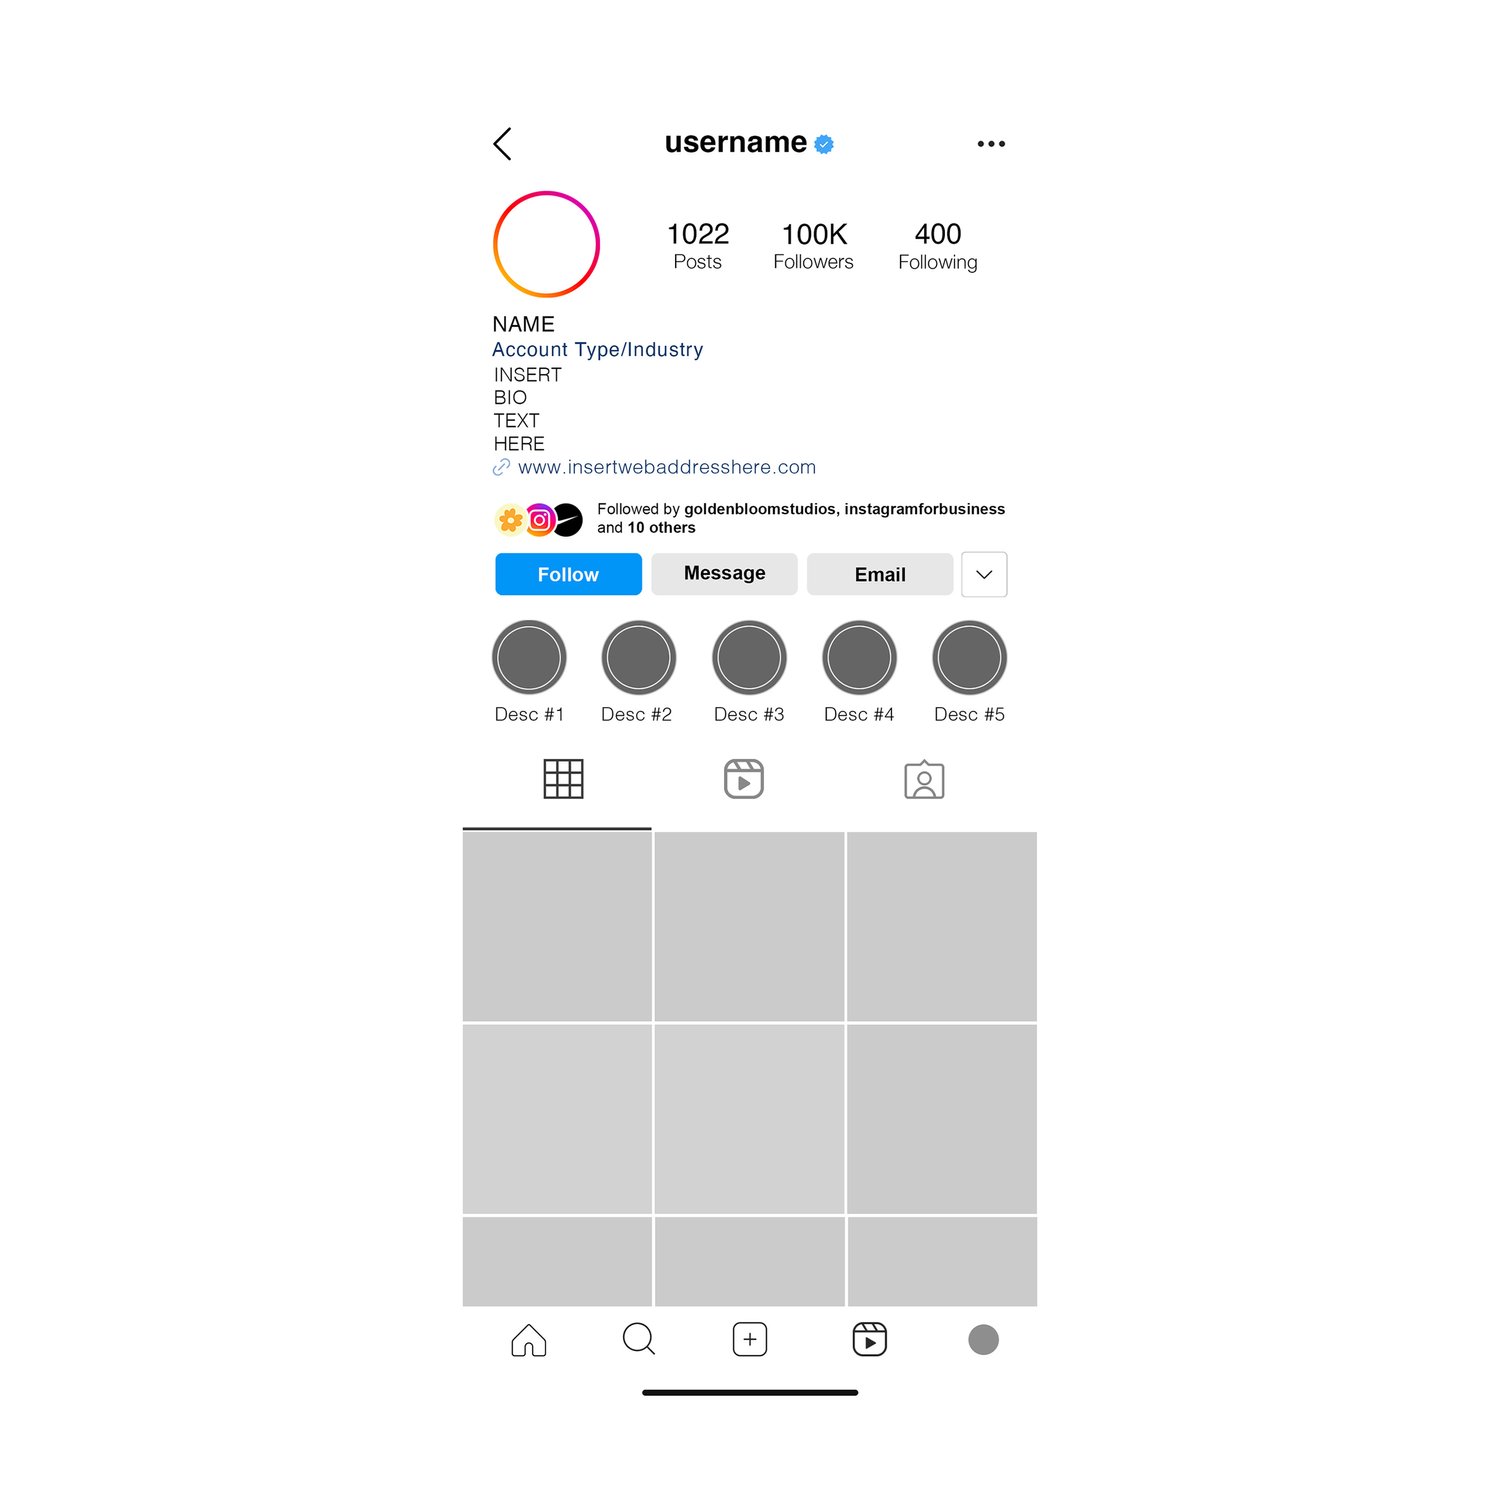 Instagram profile page